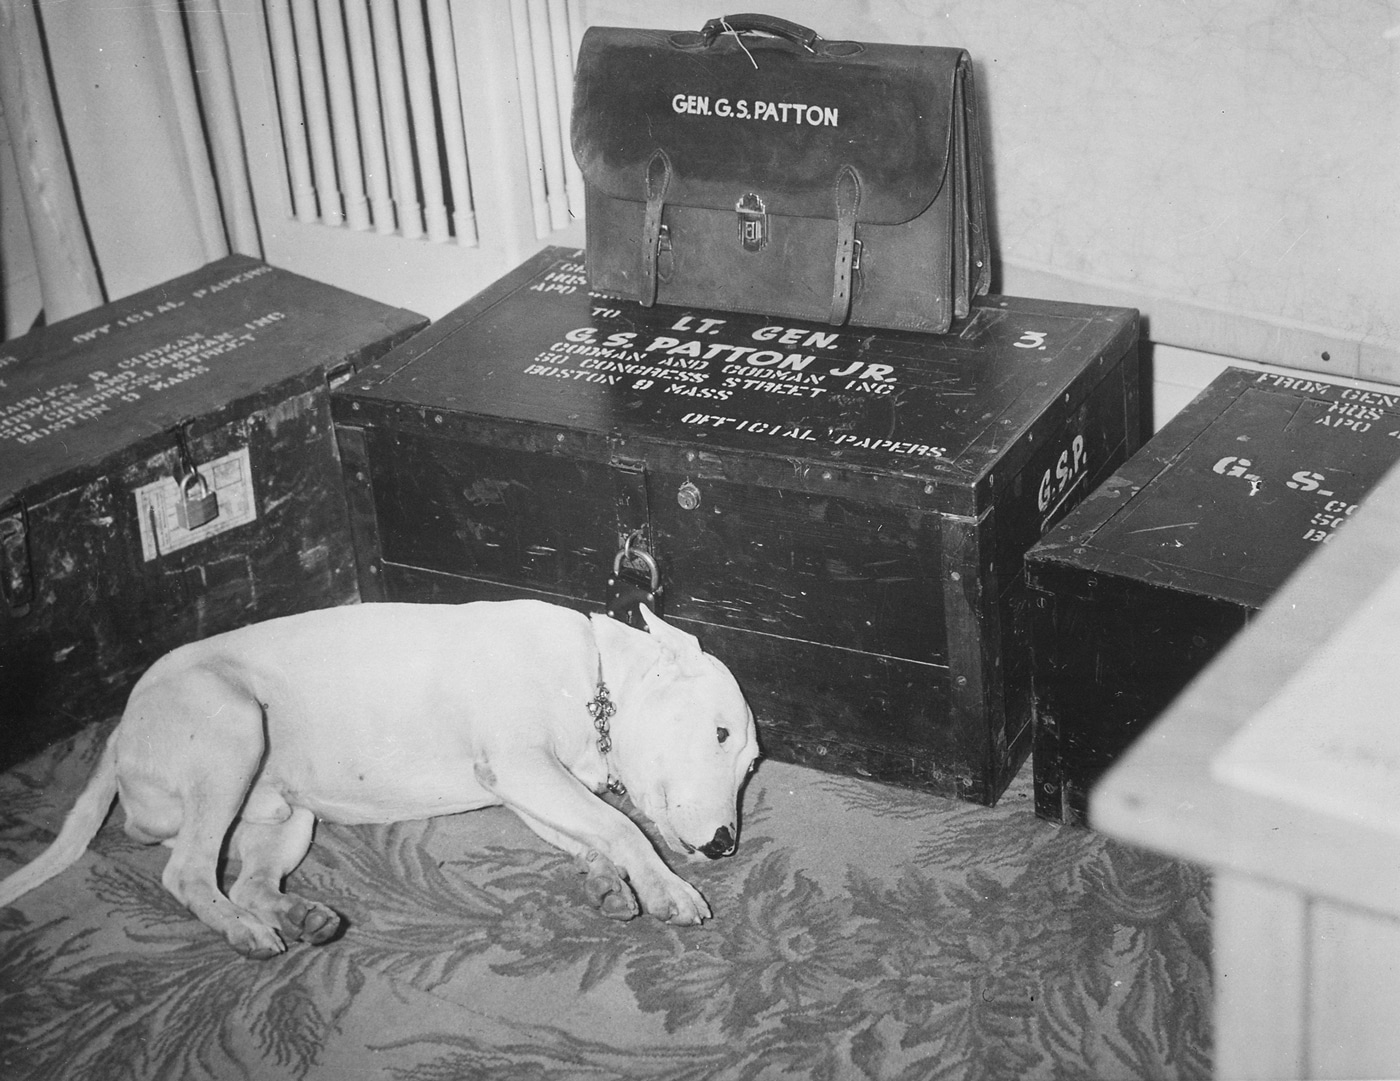 In this sad photo, we see Patton's dog Willie after Patton died. Patton's personal belongings are boxed up and stacked next to the dog.